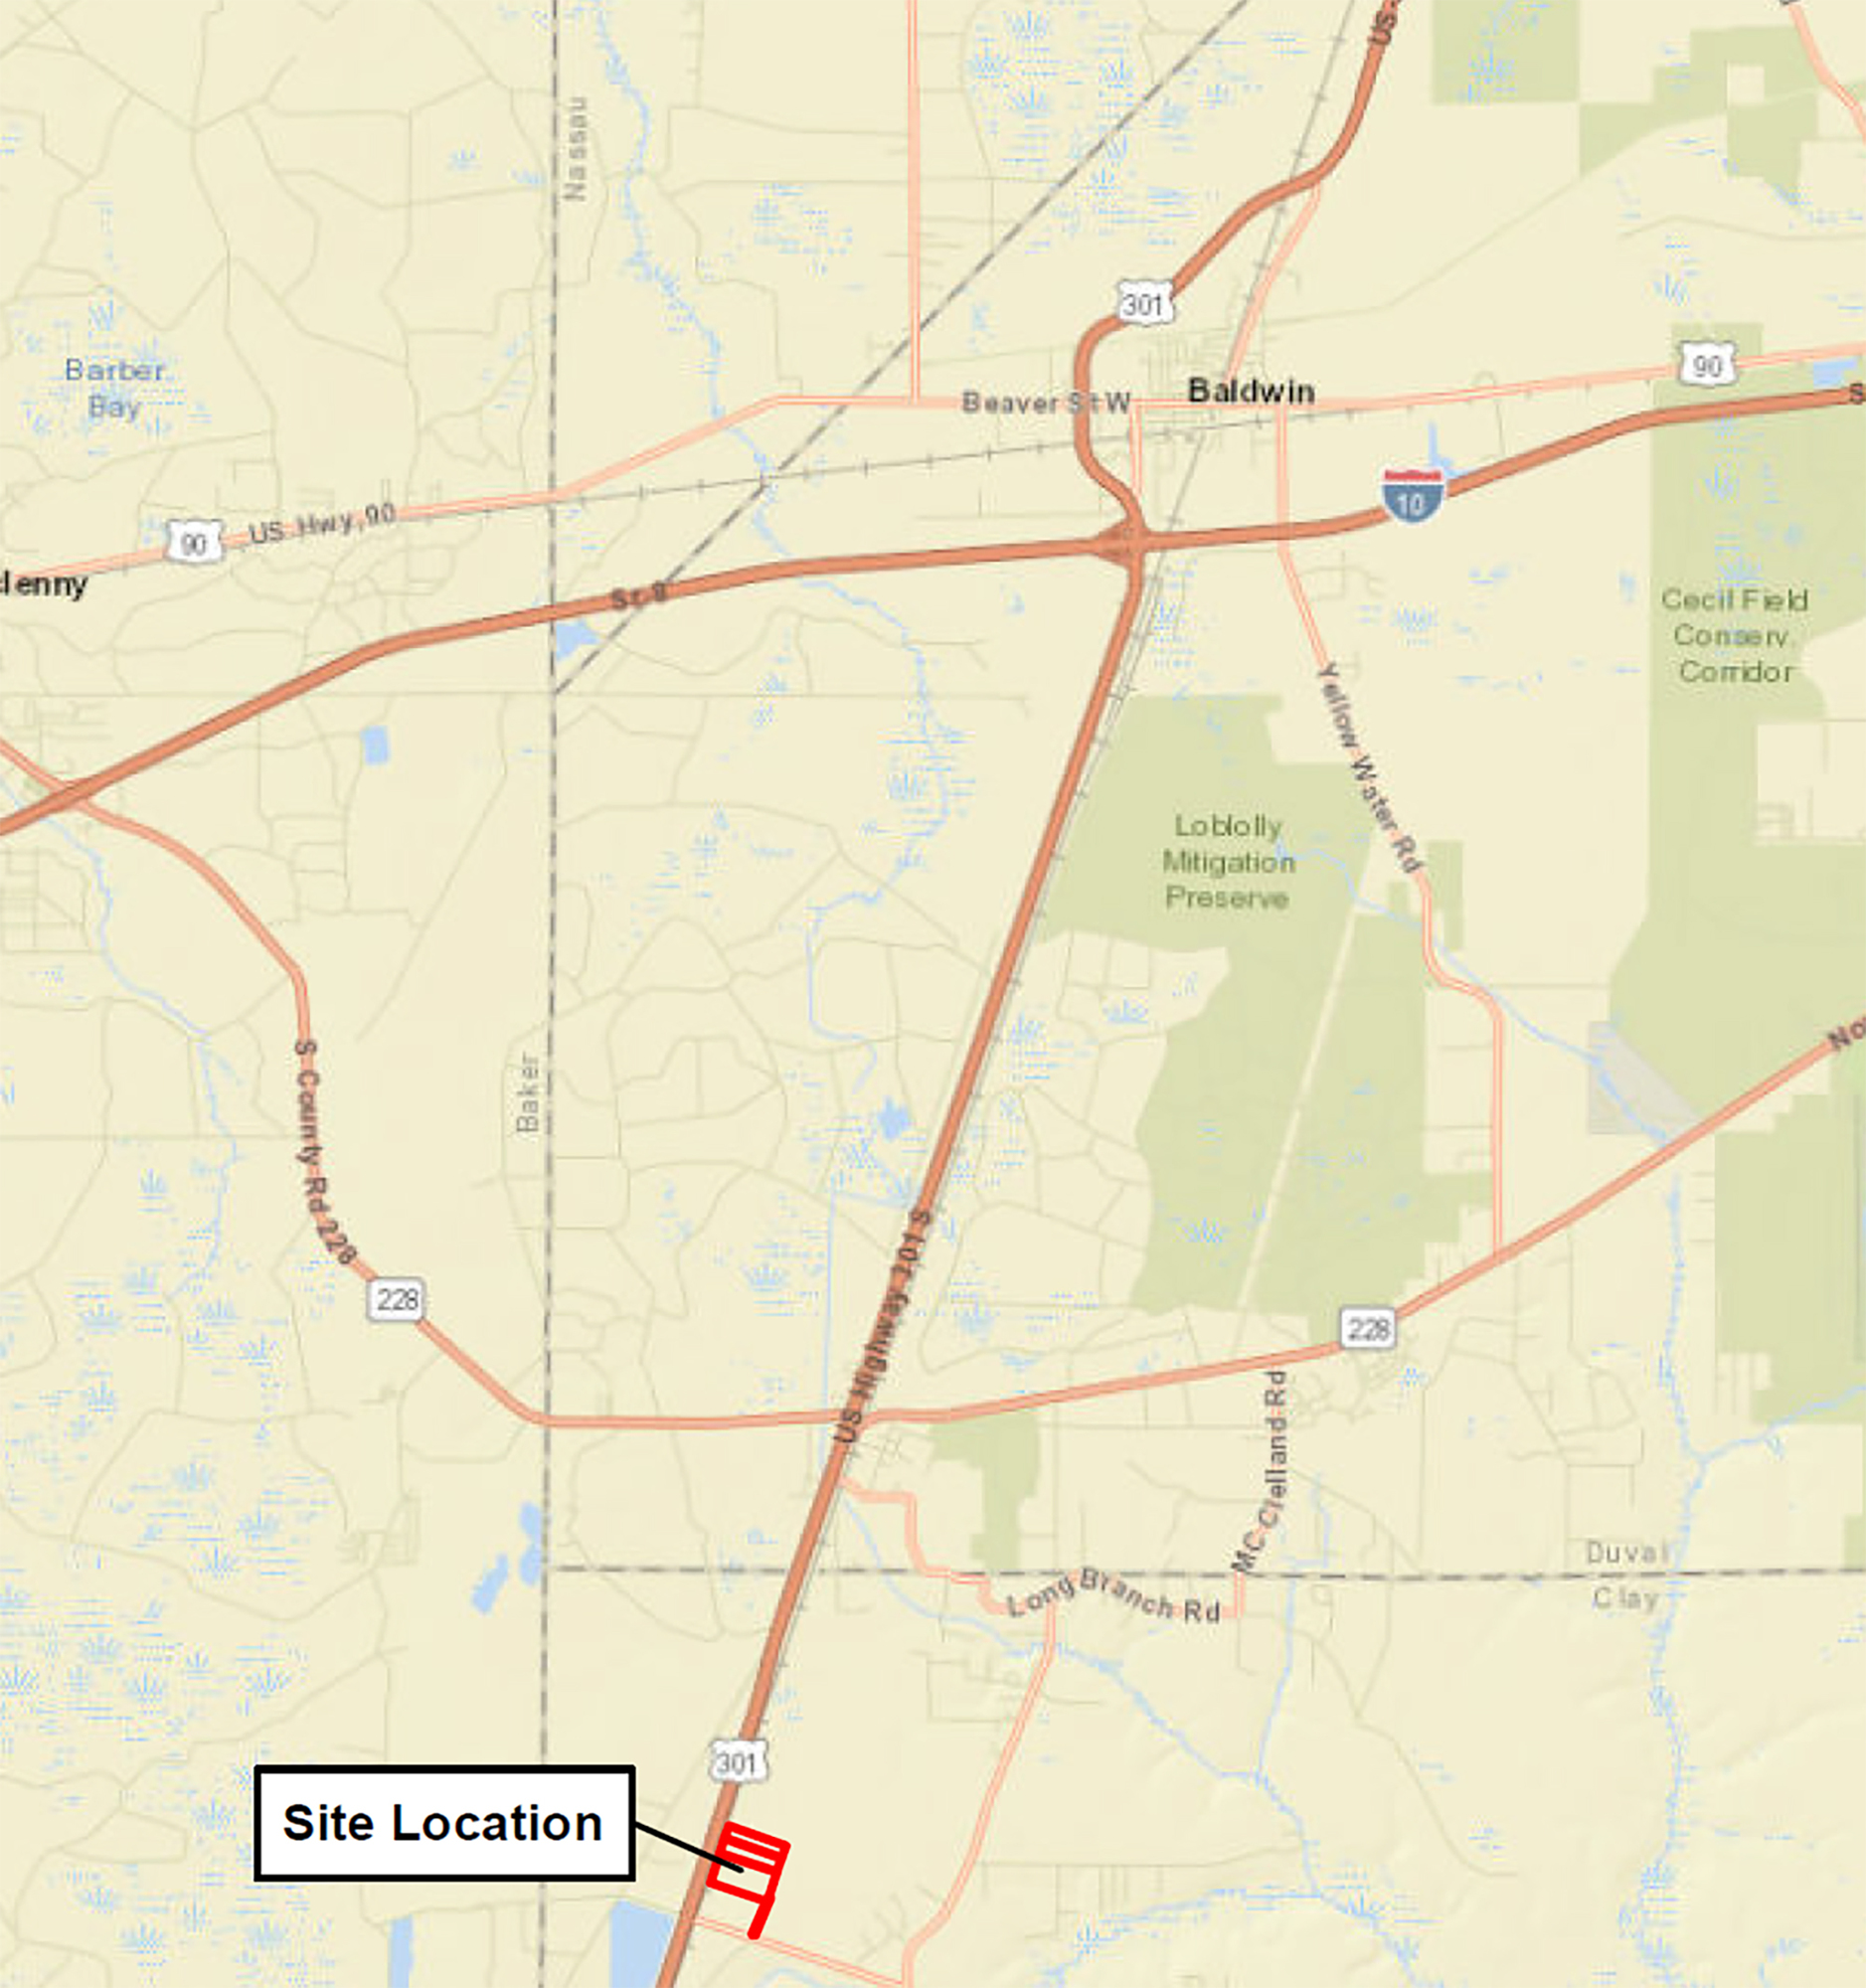 The site is 81.2 acres in the northwest corner of the county, east along U.S. 301, at County Road 218 about 10 miles south of Interstate 10.